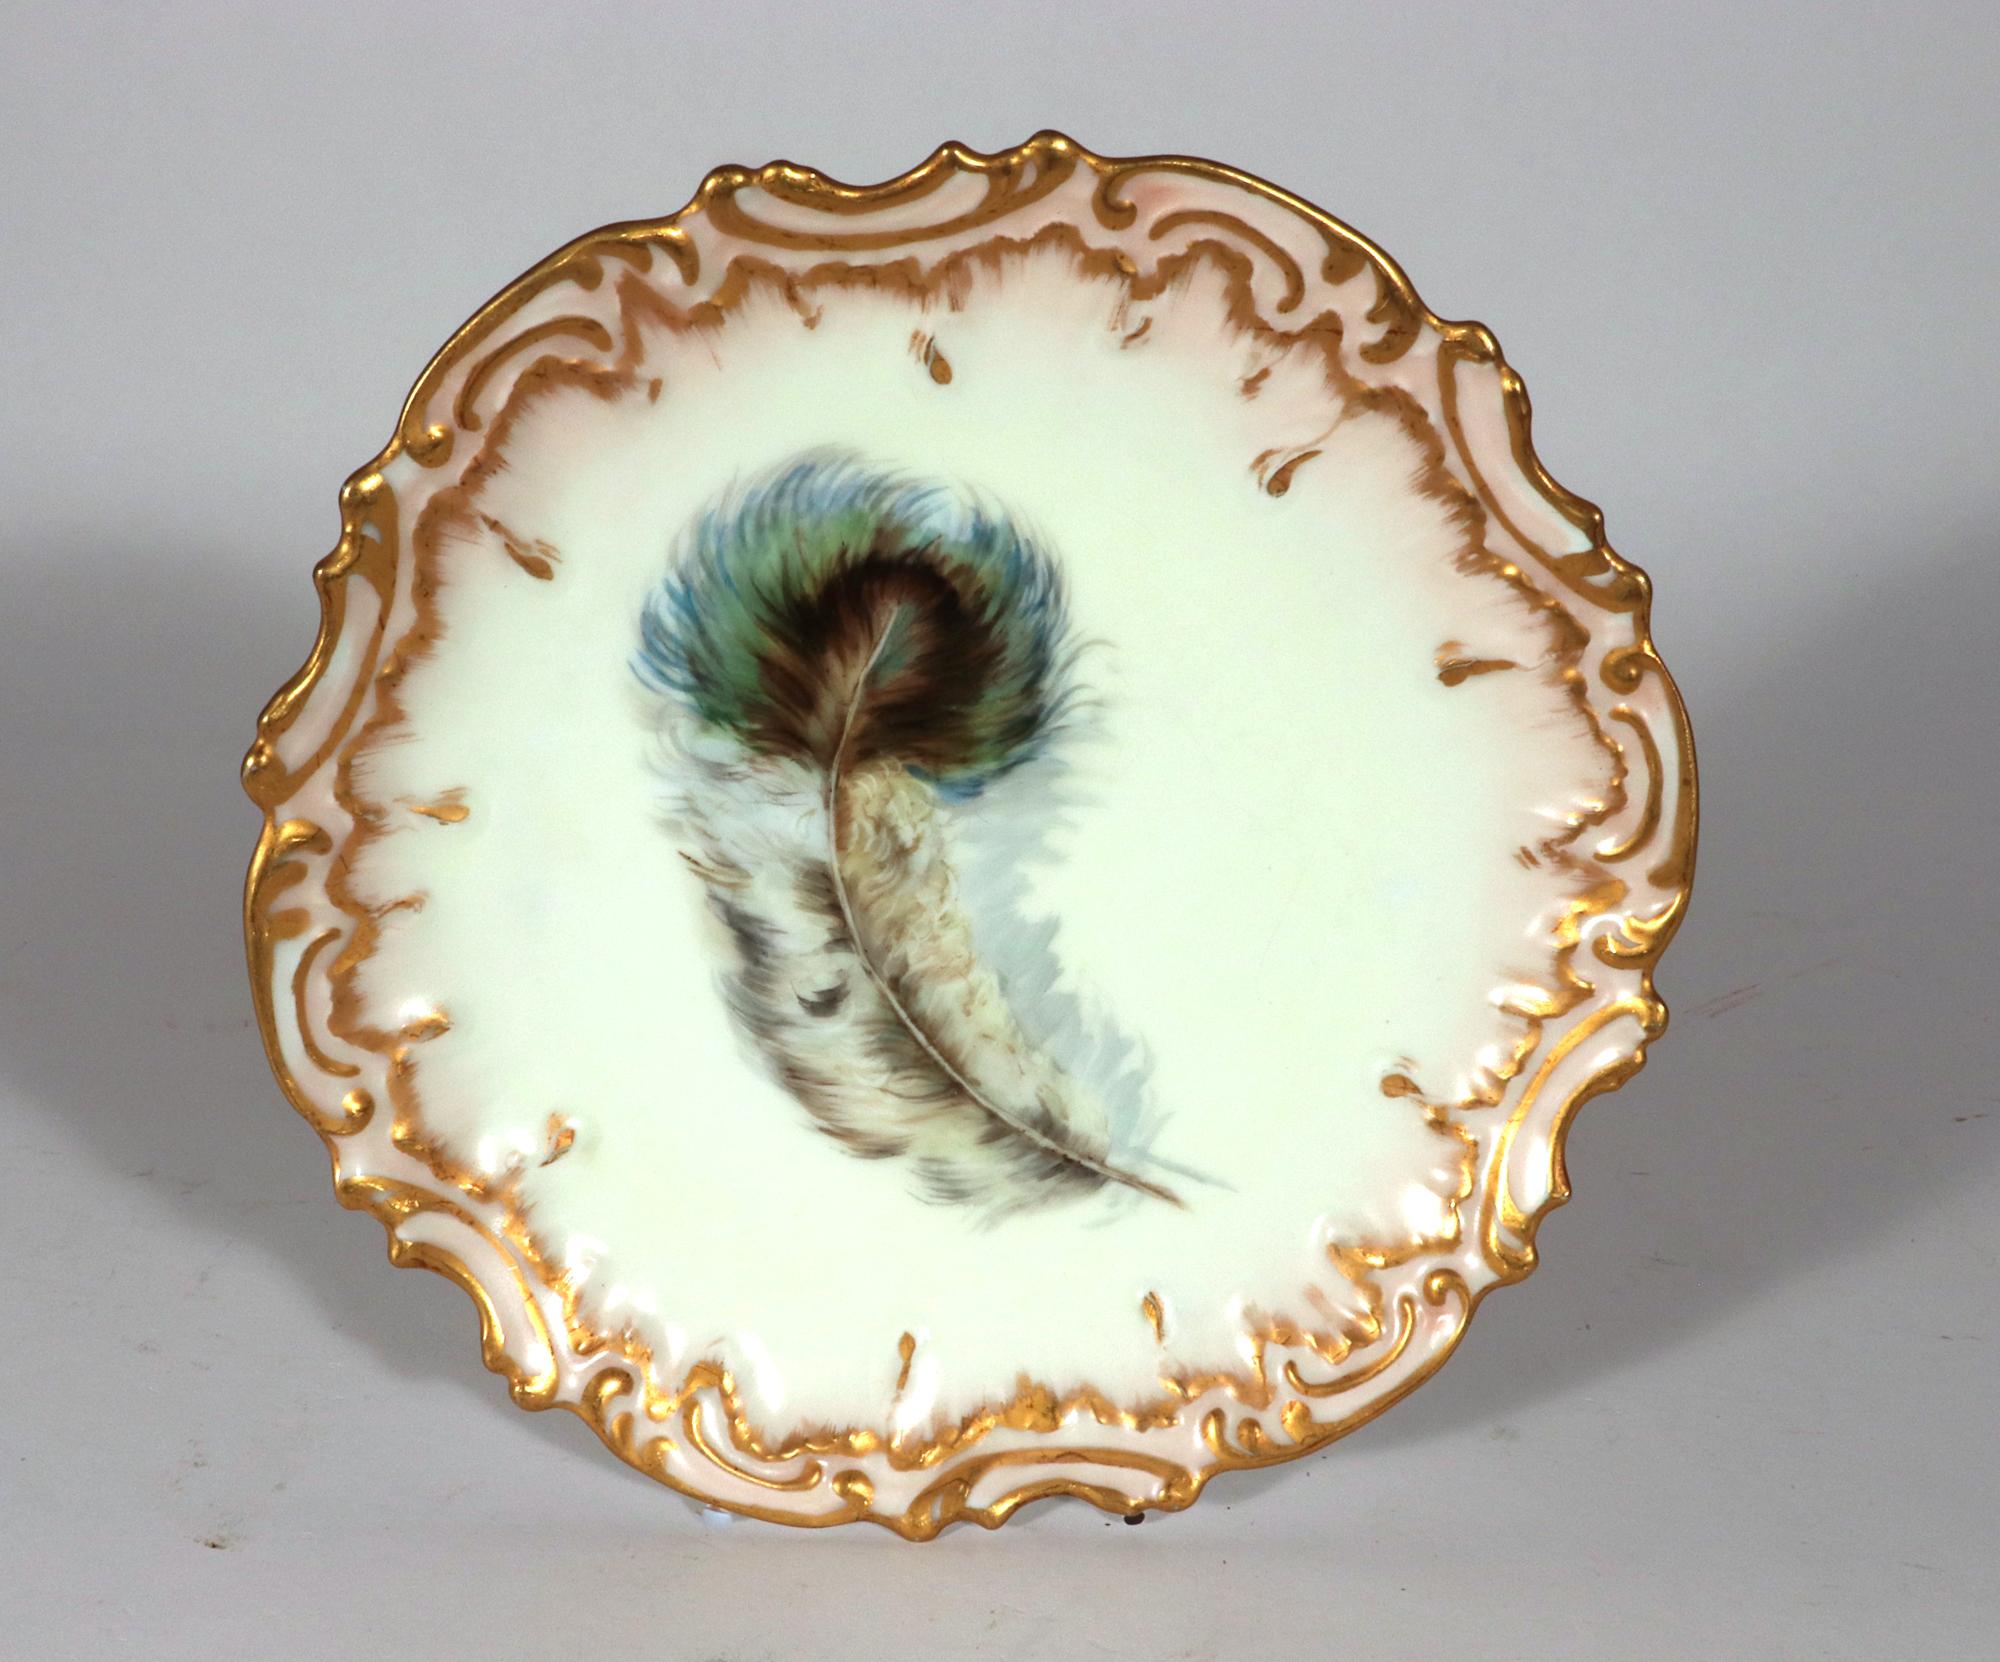 19th Century Limoges Porcelain Dessert Plates decorated with Feathers, Set of Ten